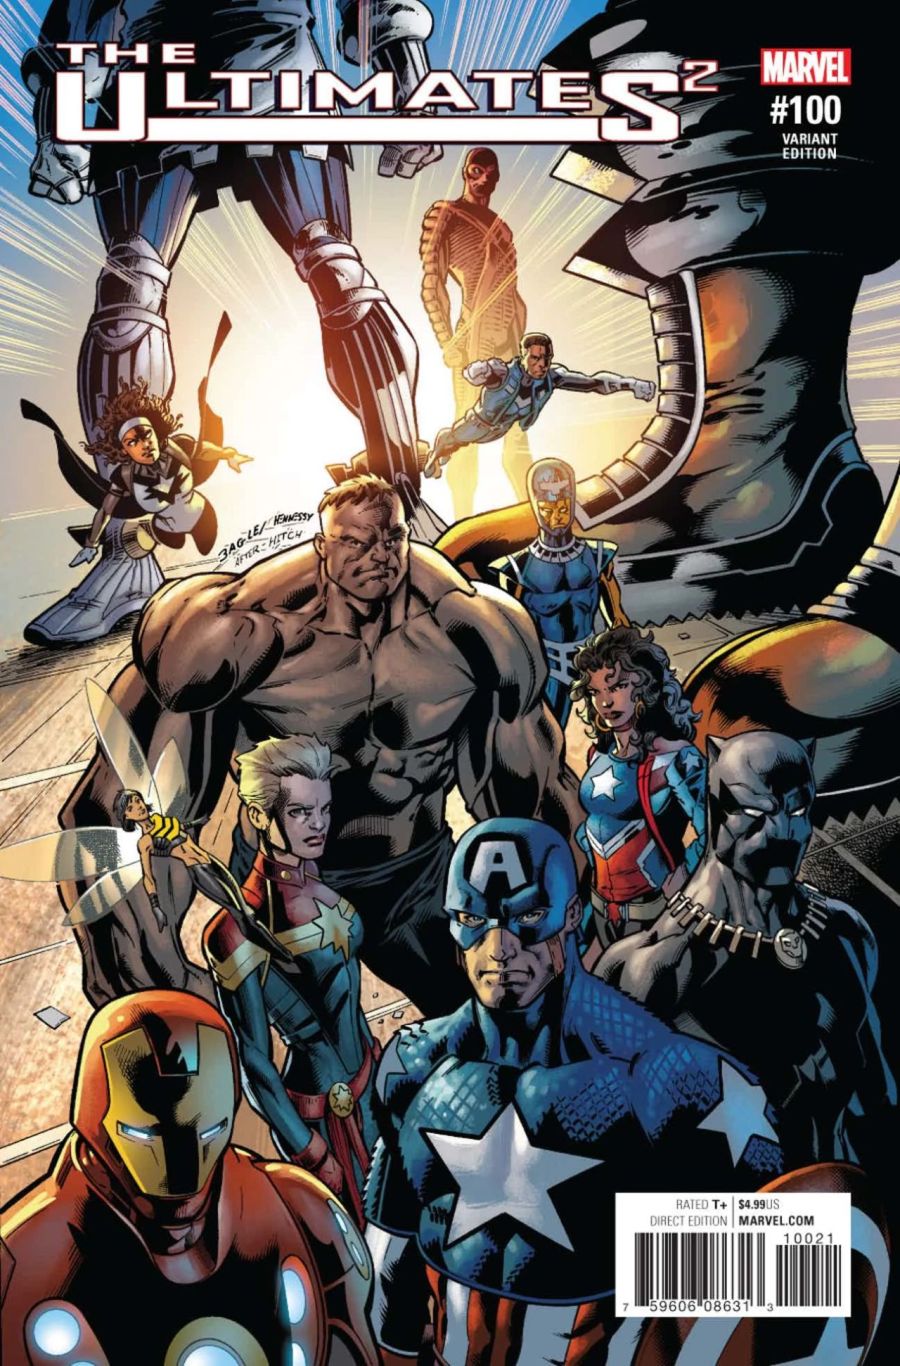 The Ultimates^2 #100